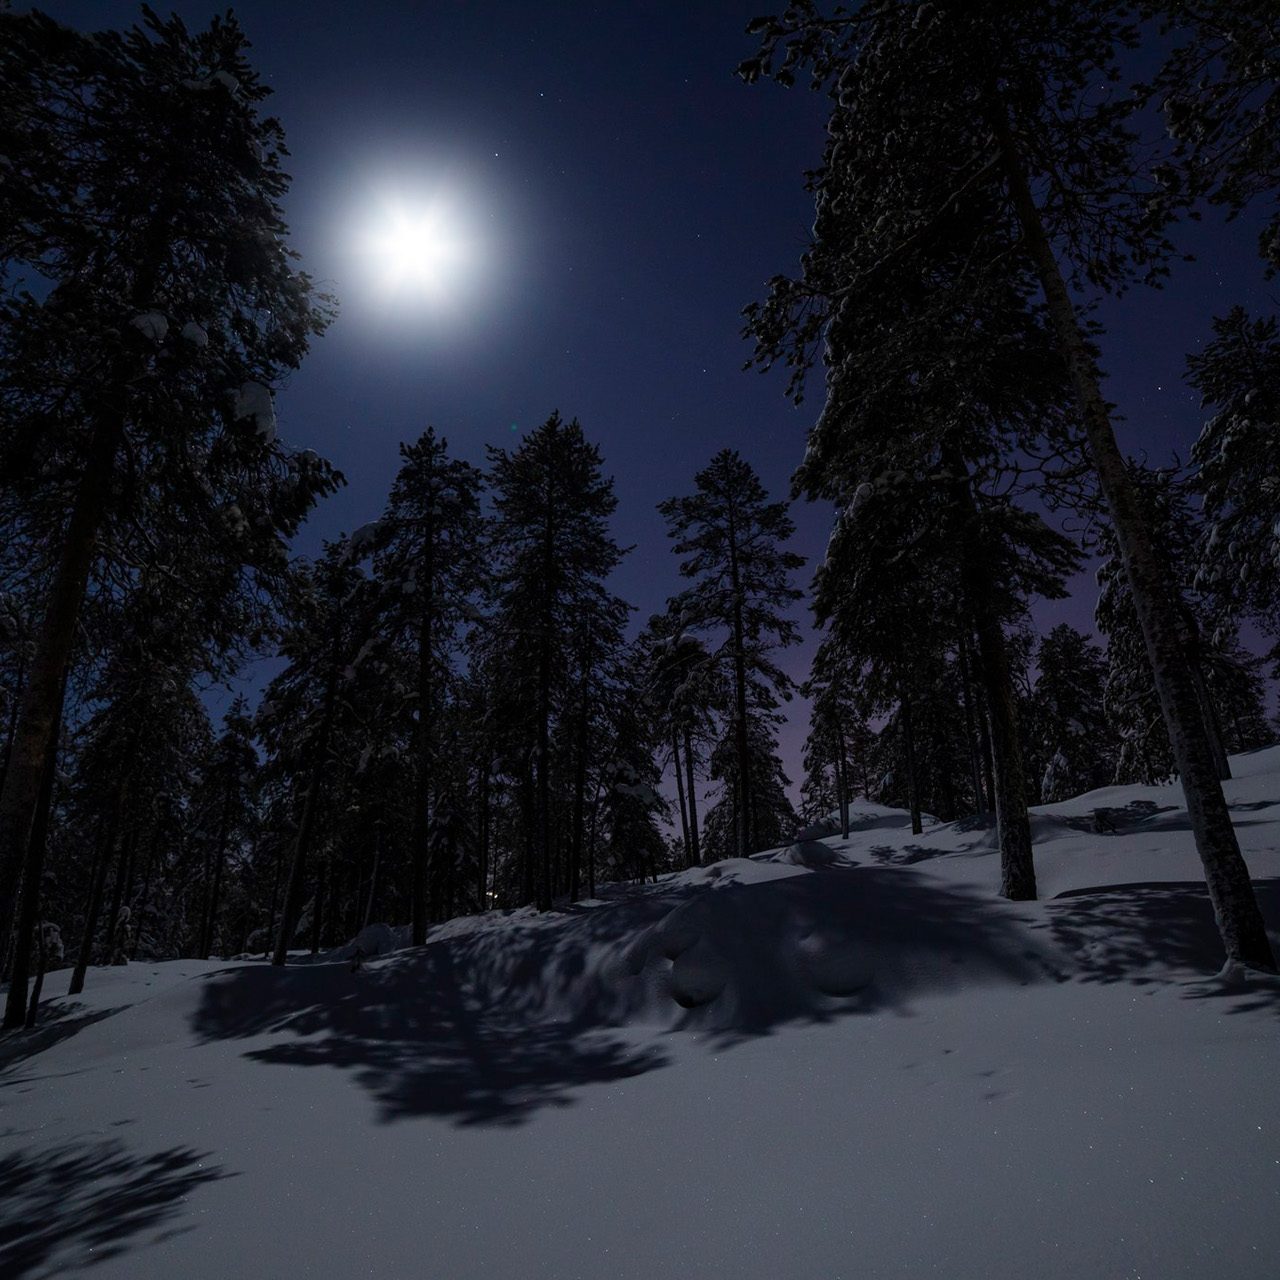 Arctic forest with snow in the moonlight.